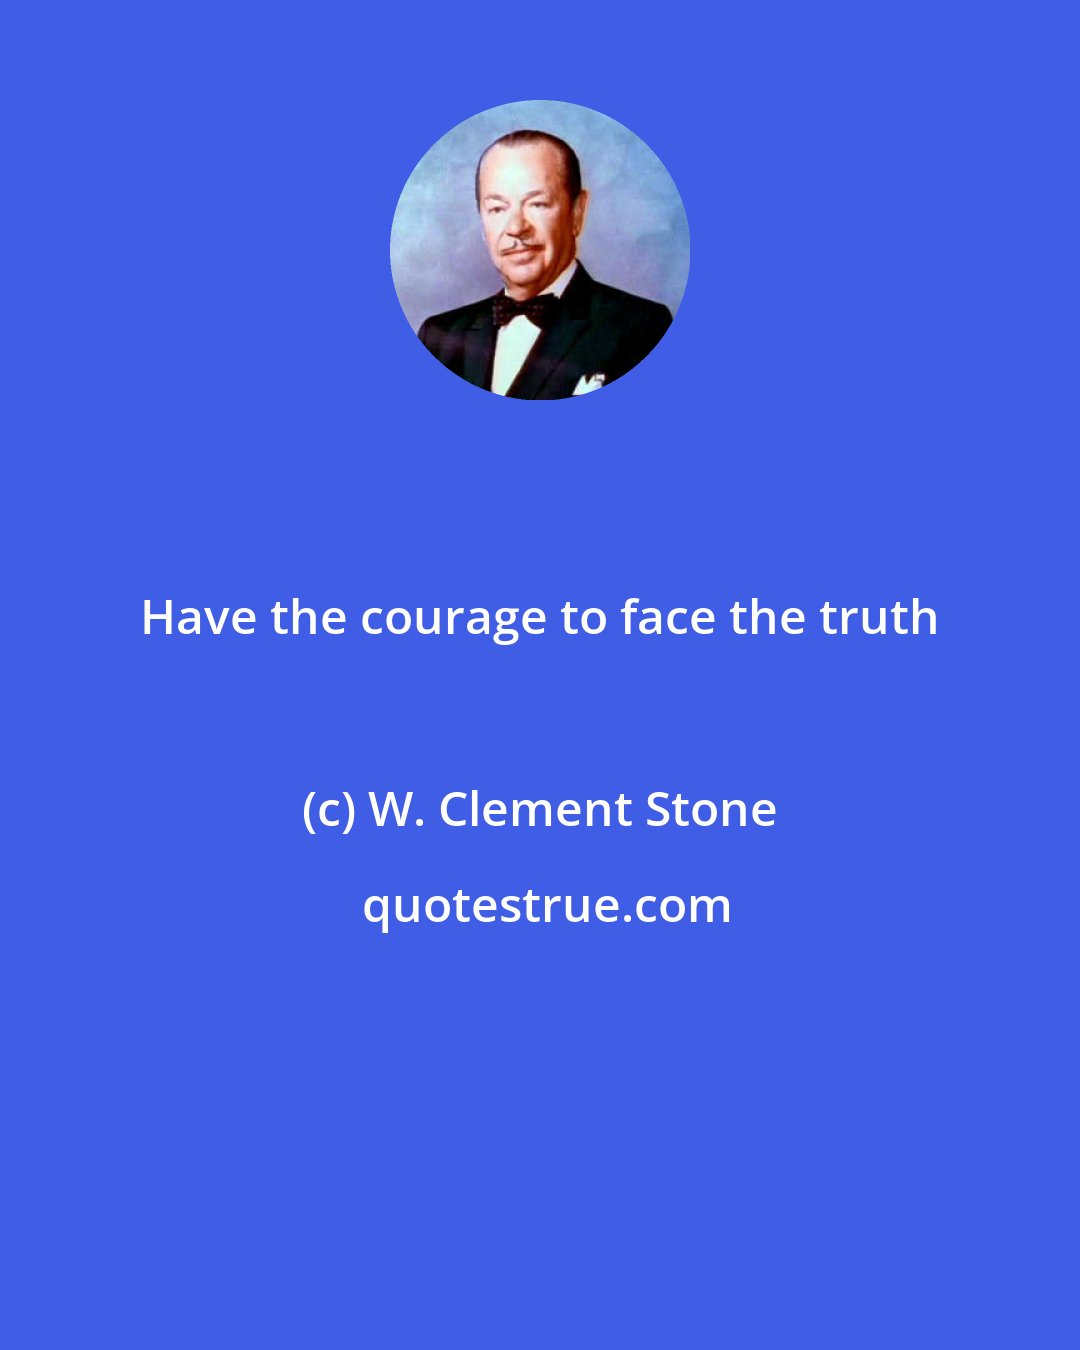 W. Clement Stone: Have the courage to face the truth